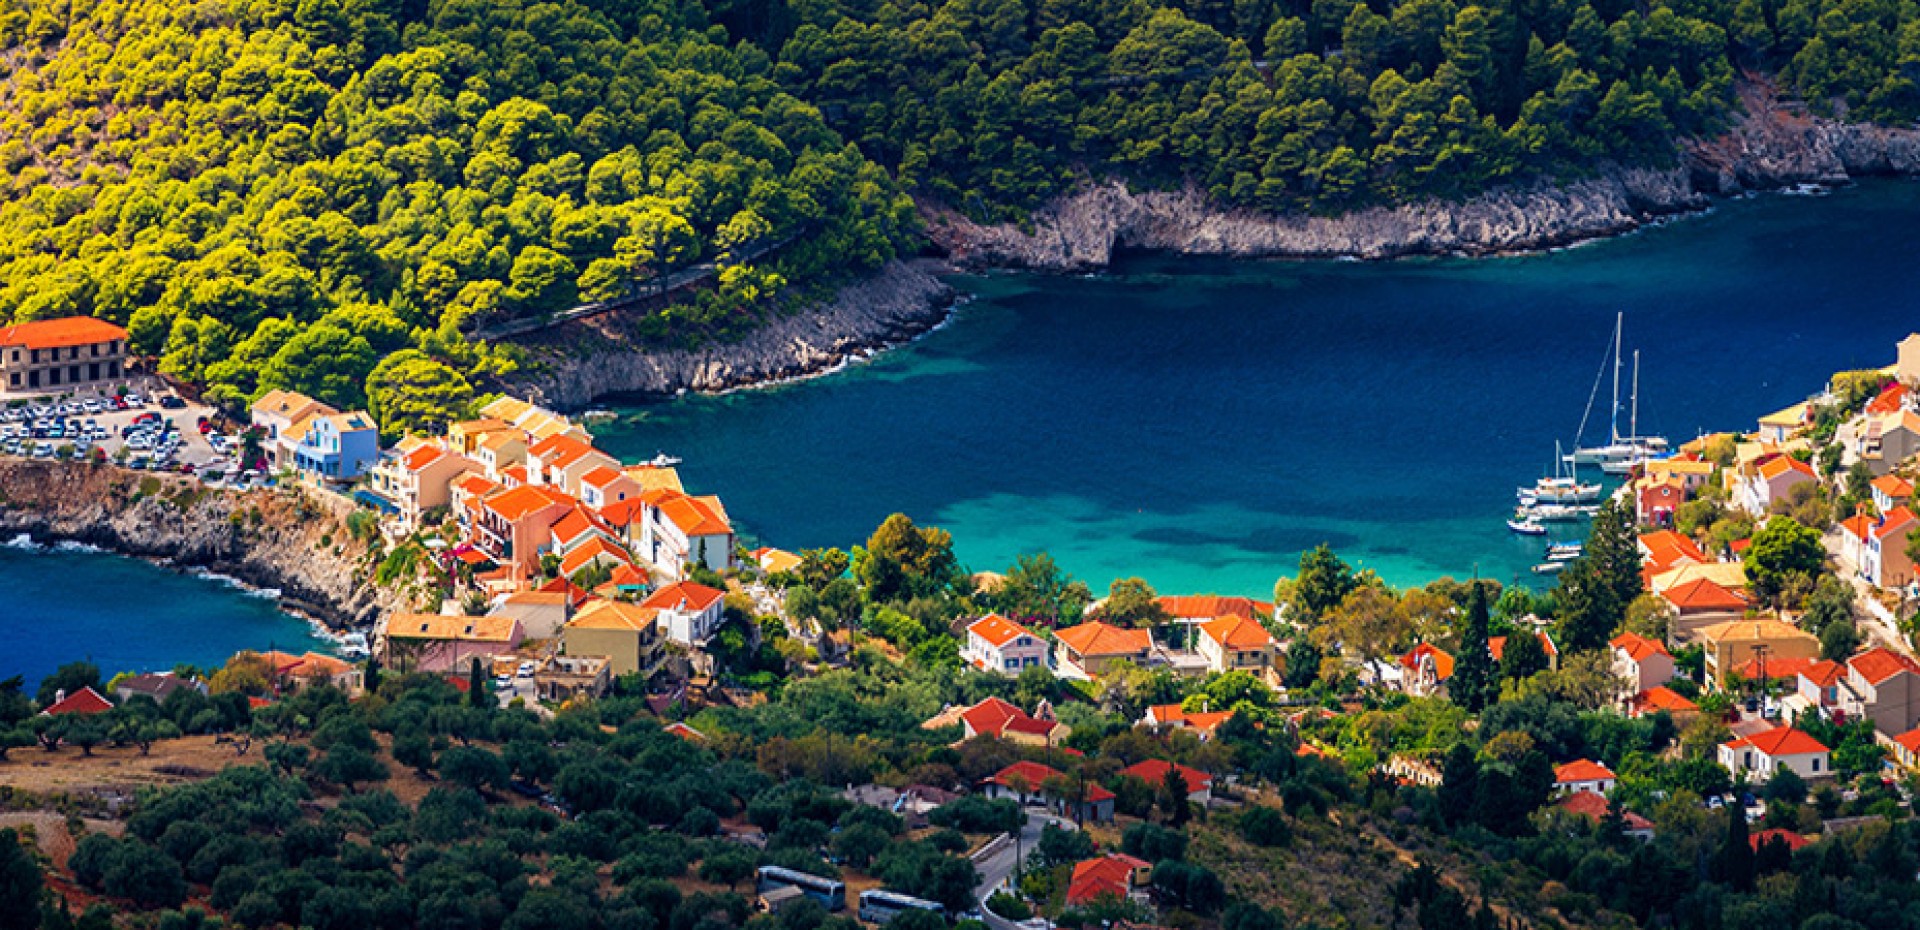 Discover Ionian islands